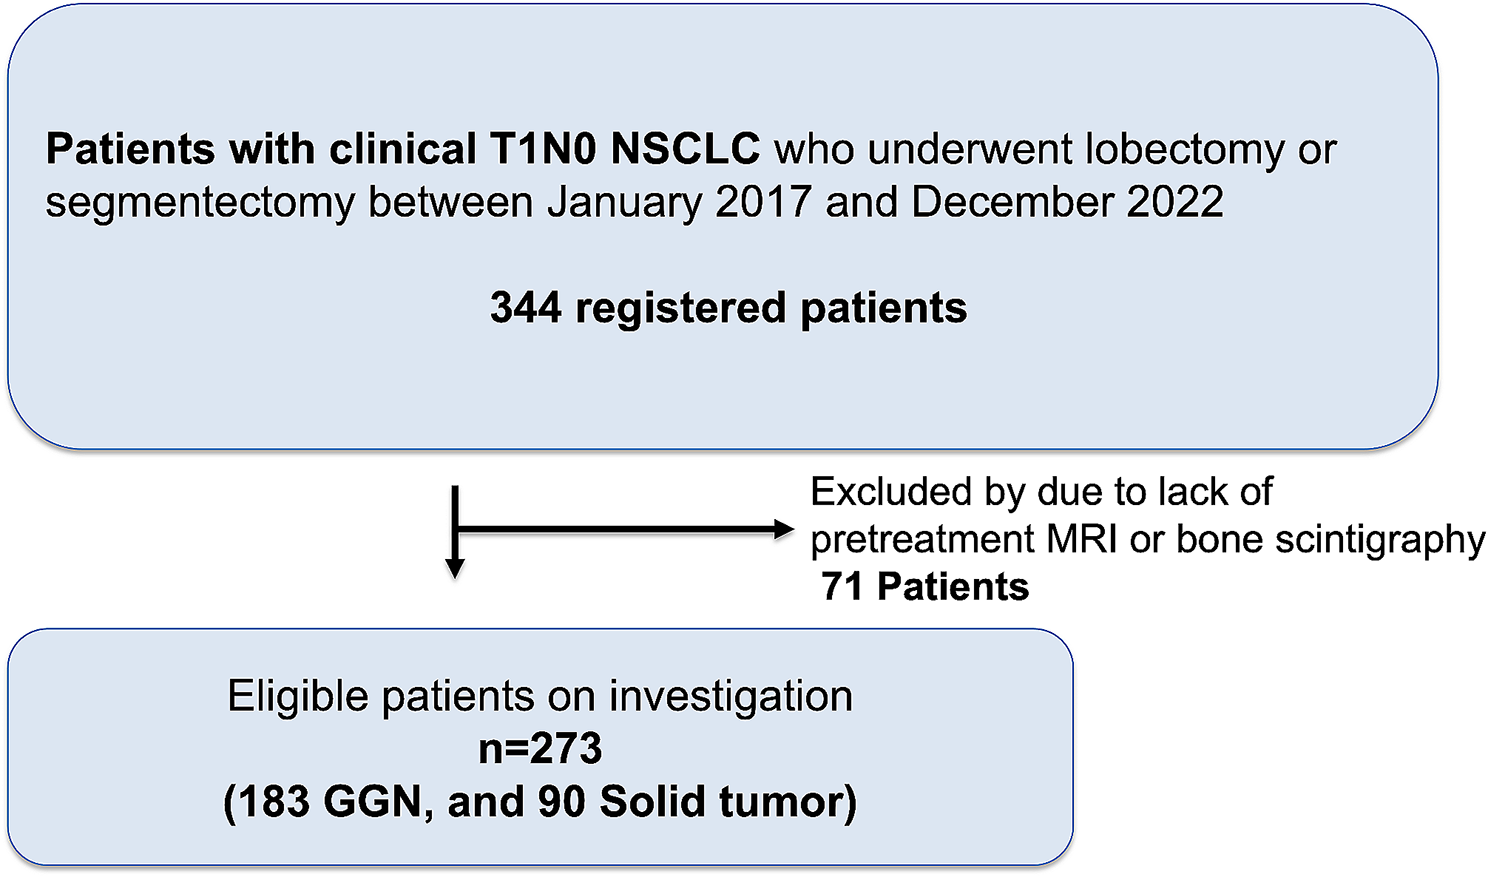 Does clinical T1N0 GGN really require checking for distant metastasis during initial staging for lung cancer?